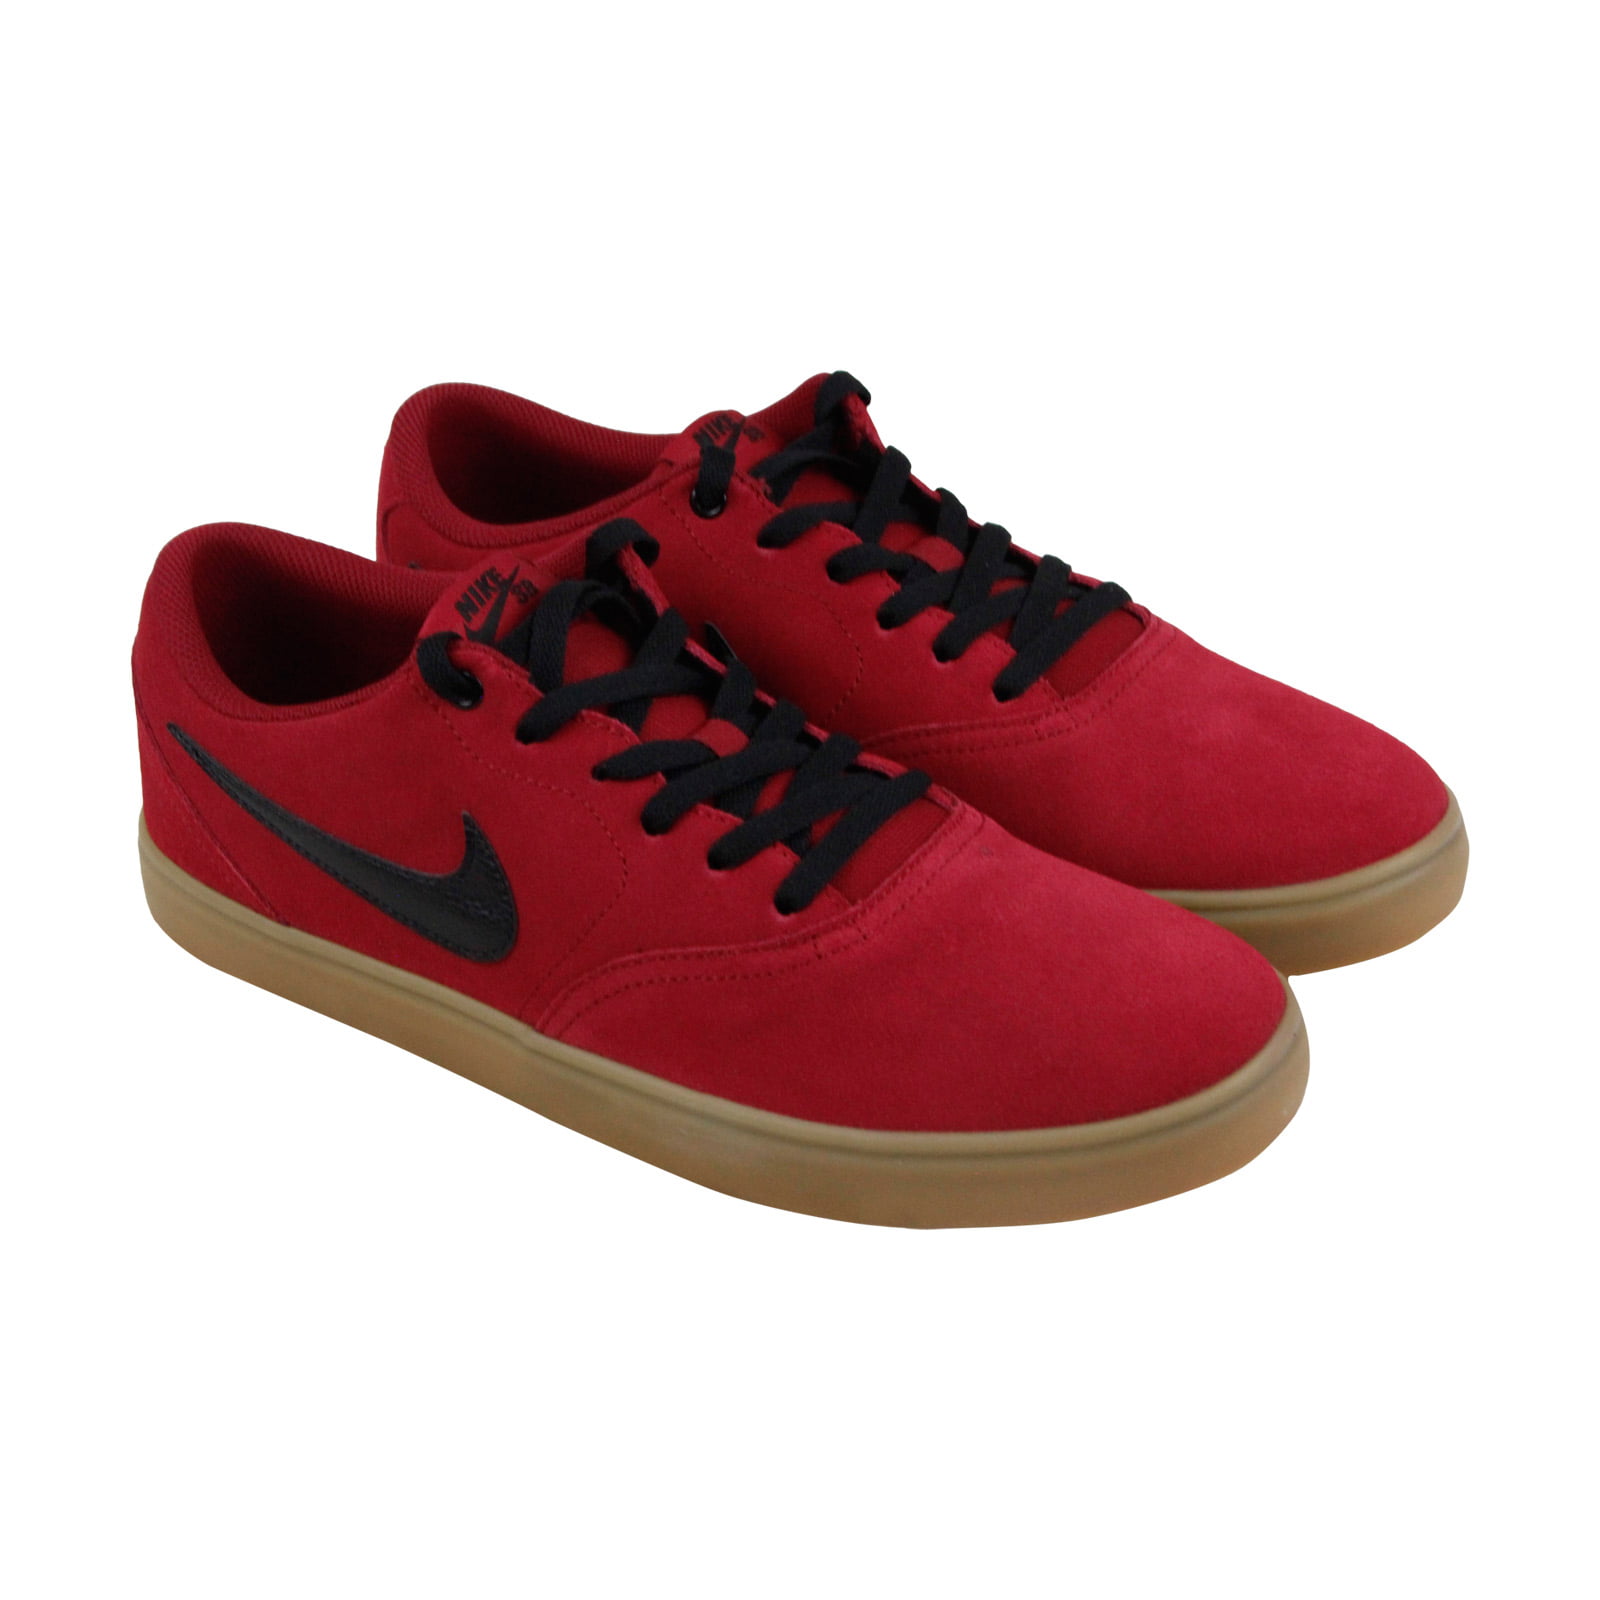 Nike - Nike Sb Check Solar Mens Red Suede Sneakers Lace Up ...